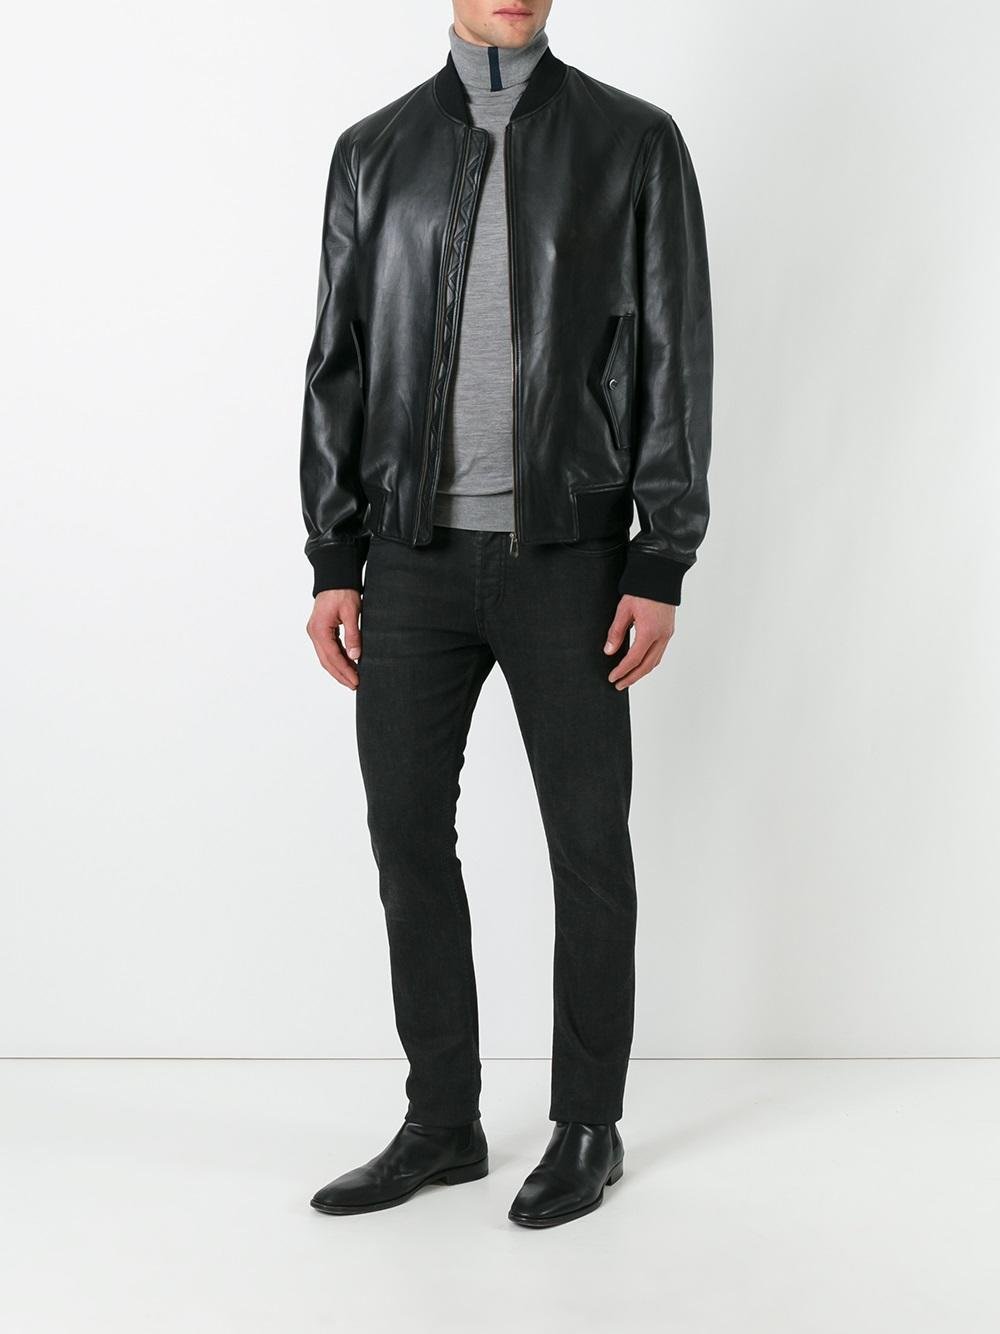 Lyst - Versace Leather Bomber Jacket in Black for Men